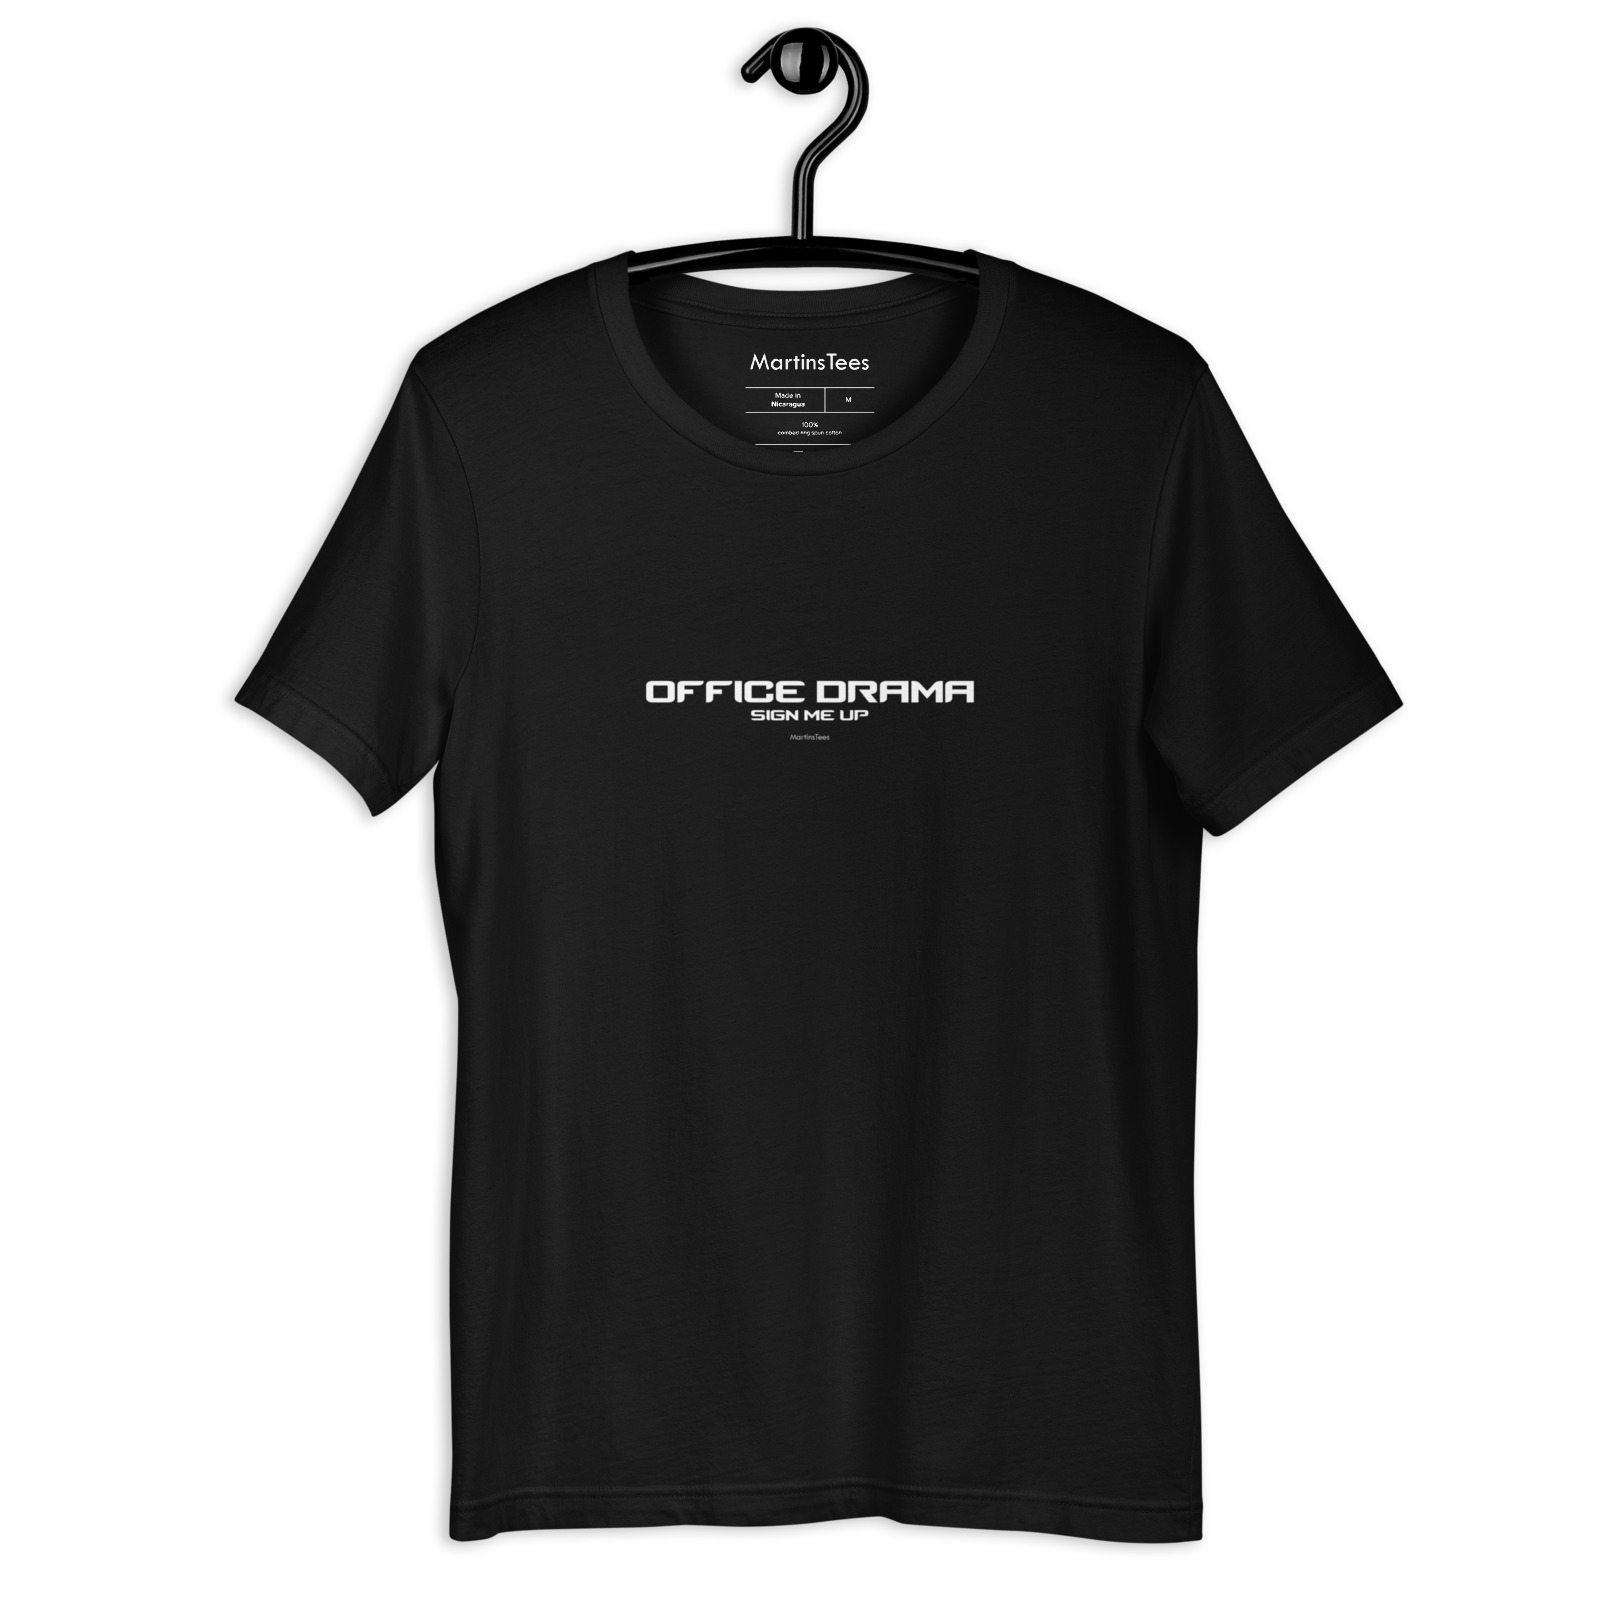 T-shirt: OFFICE DRAMA - SIGN ME UP